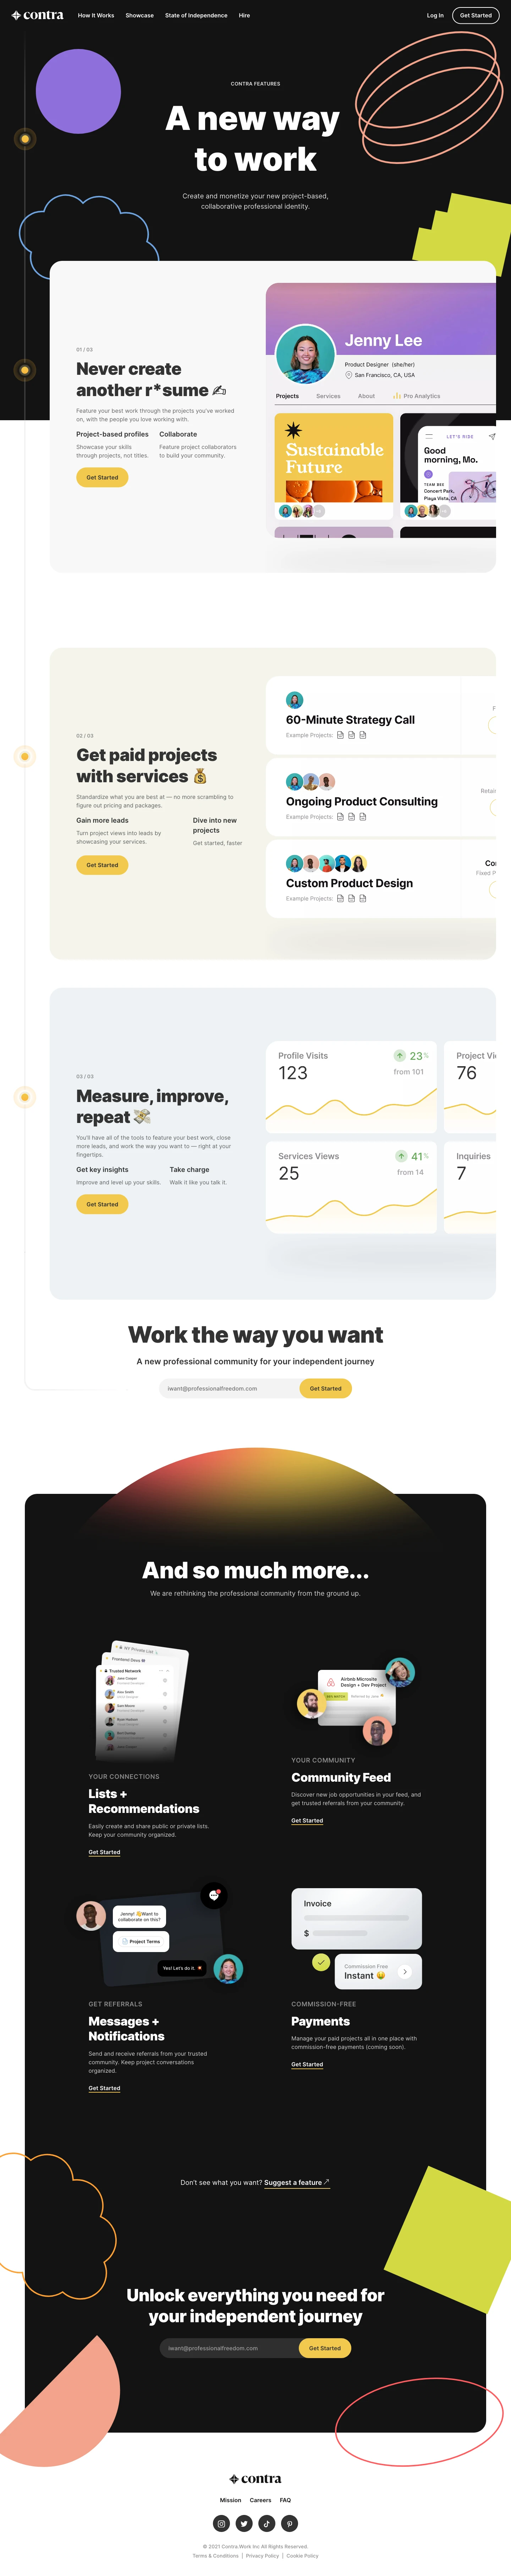 Contra Landing Page Example: Contra is a new professional community for your independent journey. Everything you need to find remote, freelance and flexible work from your own trusted network.